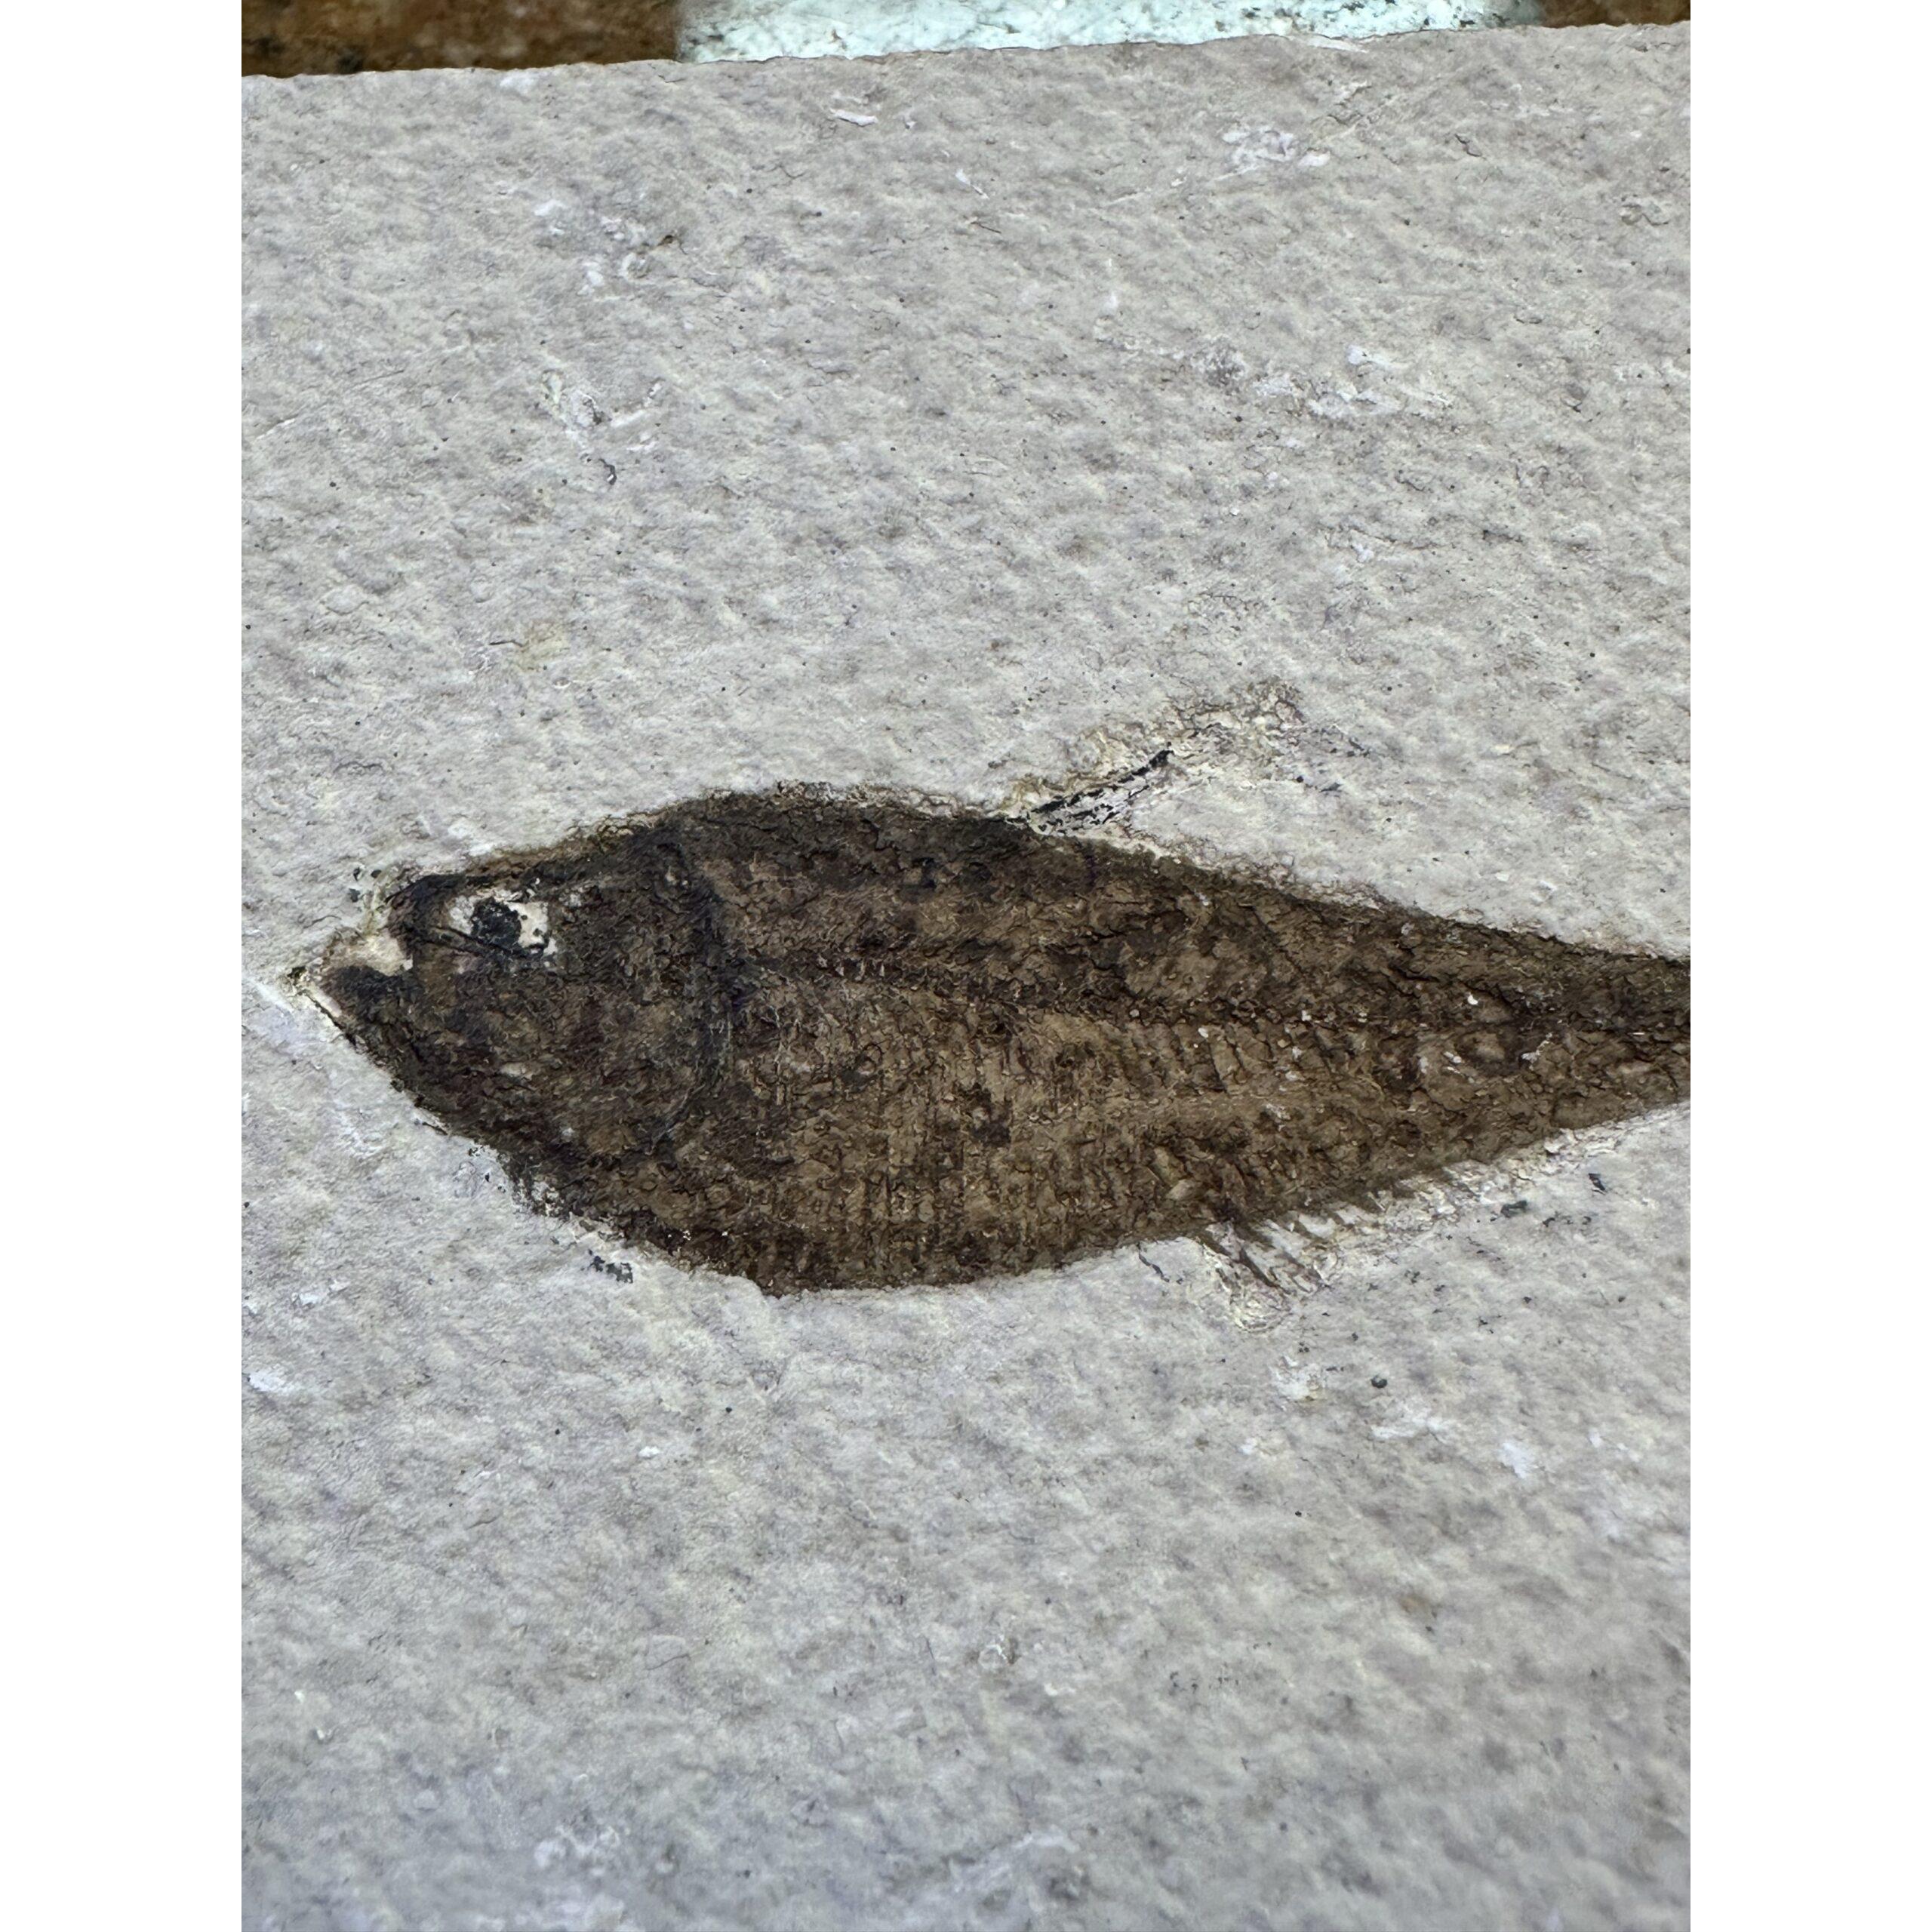 Knightia Fossil Fish from Wyoming Prehistoric Online